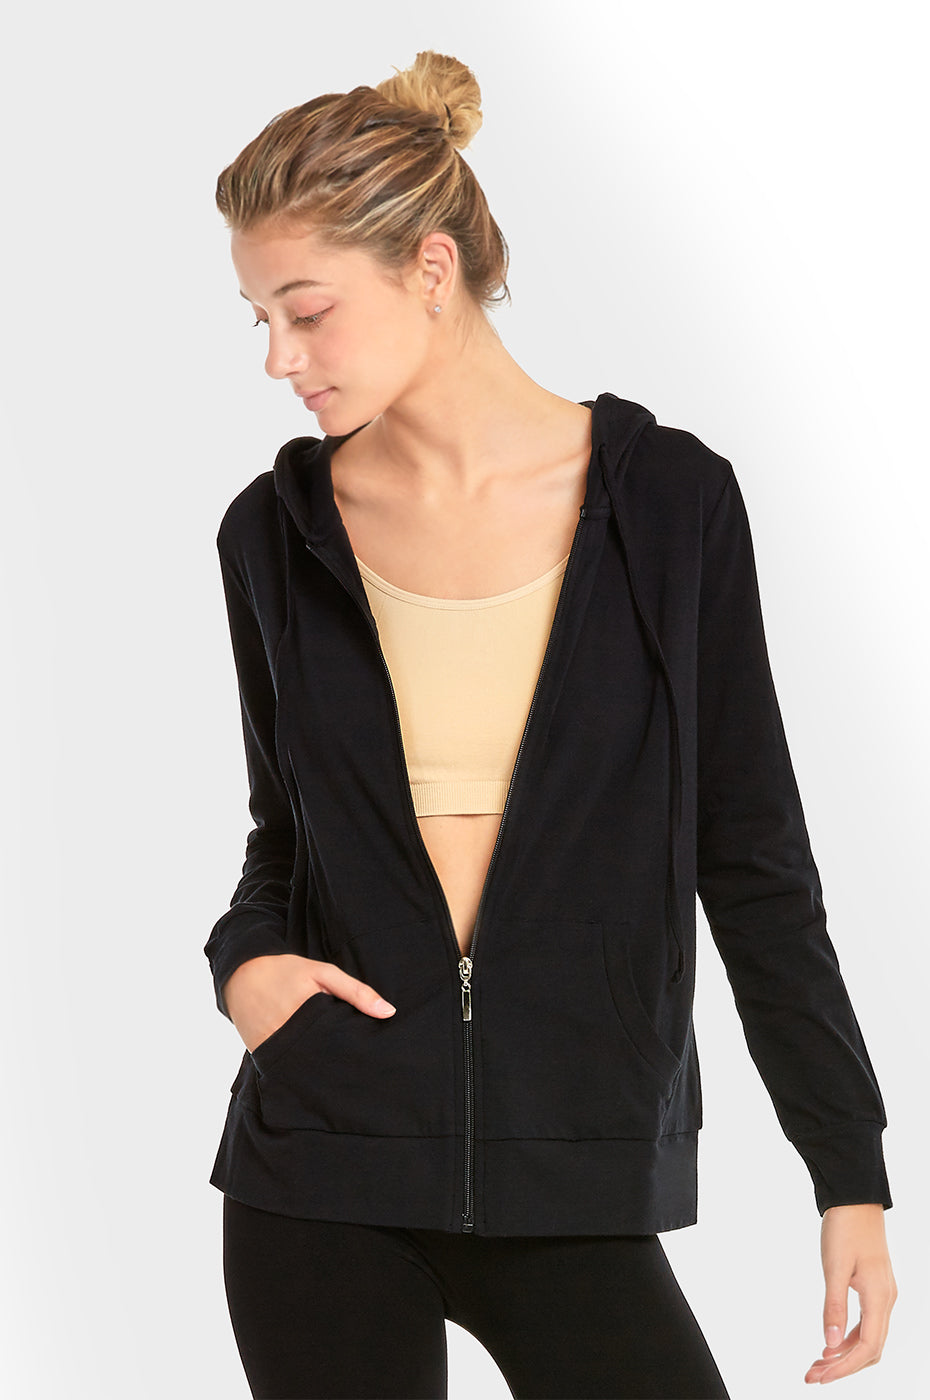 Sofra Women's Lightweight Cotton Blend Long Sleeve Zip Up Thin Hoodie Jacket - image 2 of 4